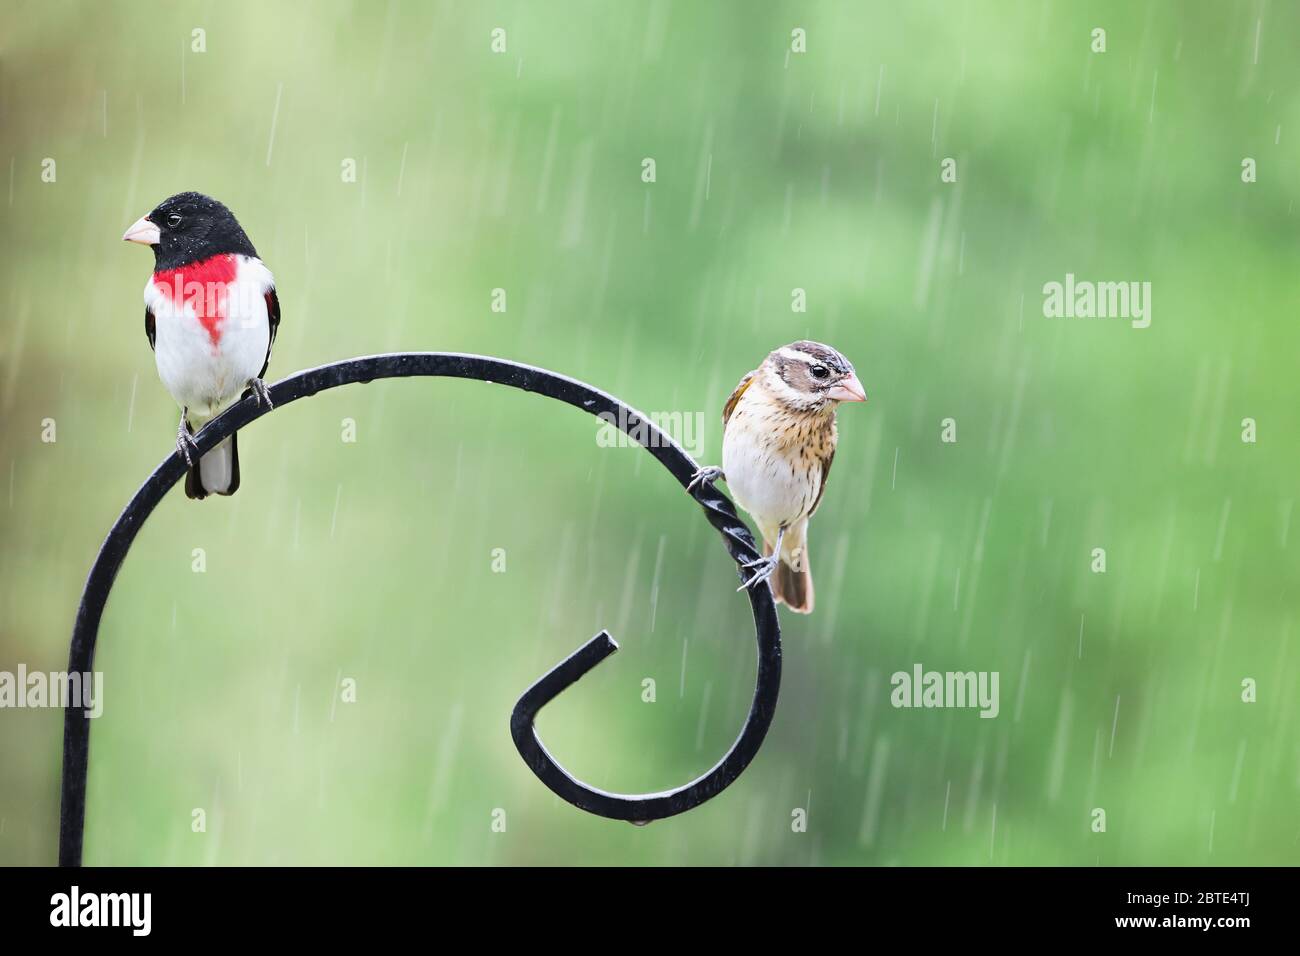 Male and female Rose Breasted Grosbeak, Pheucticus ludovicianus, sitting on a feeder pole during the middle of a spring rain. Stock Photo